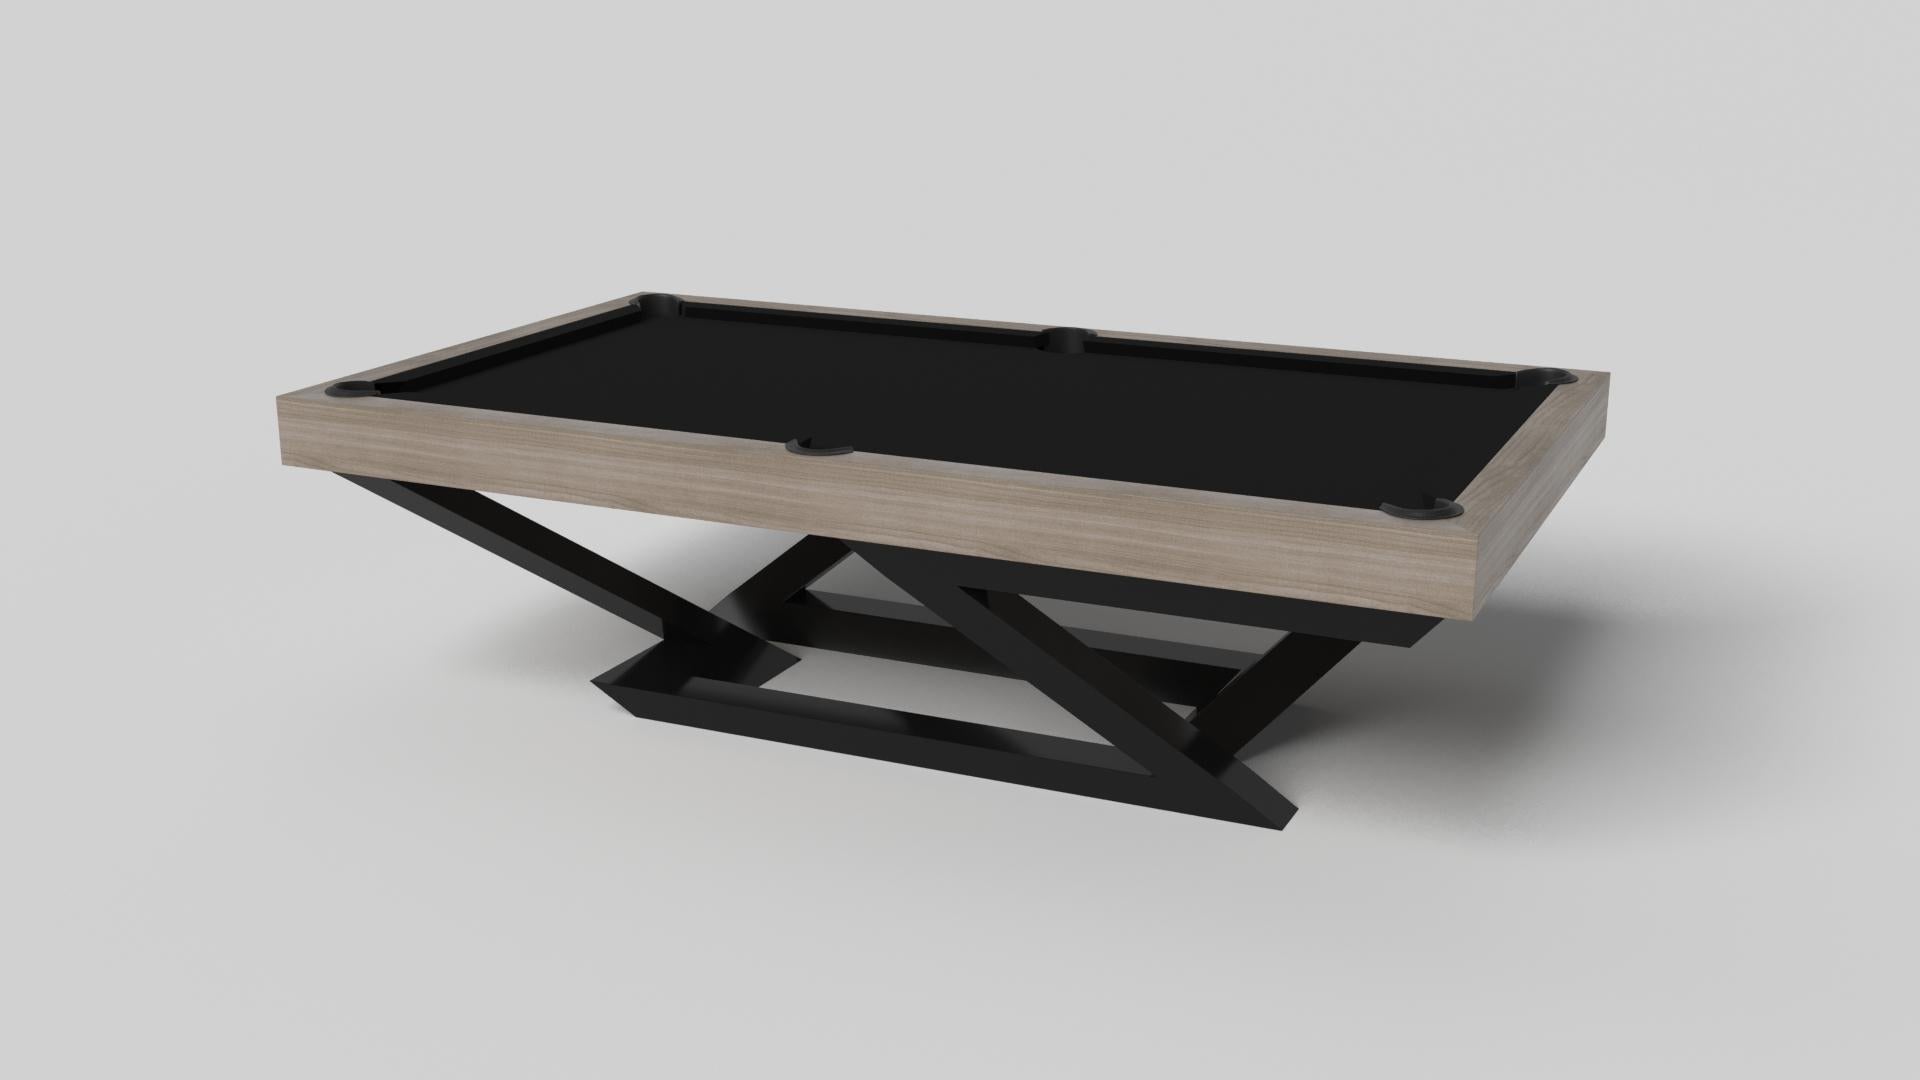 A contemporary composition of clean lines and sleek edges, the Trinity pool table in black chrome with red accent is an elegant expression of modern design. Handcrafted and detailed with a regulation top for professional game play, this table offers